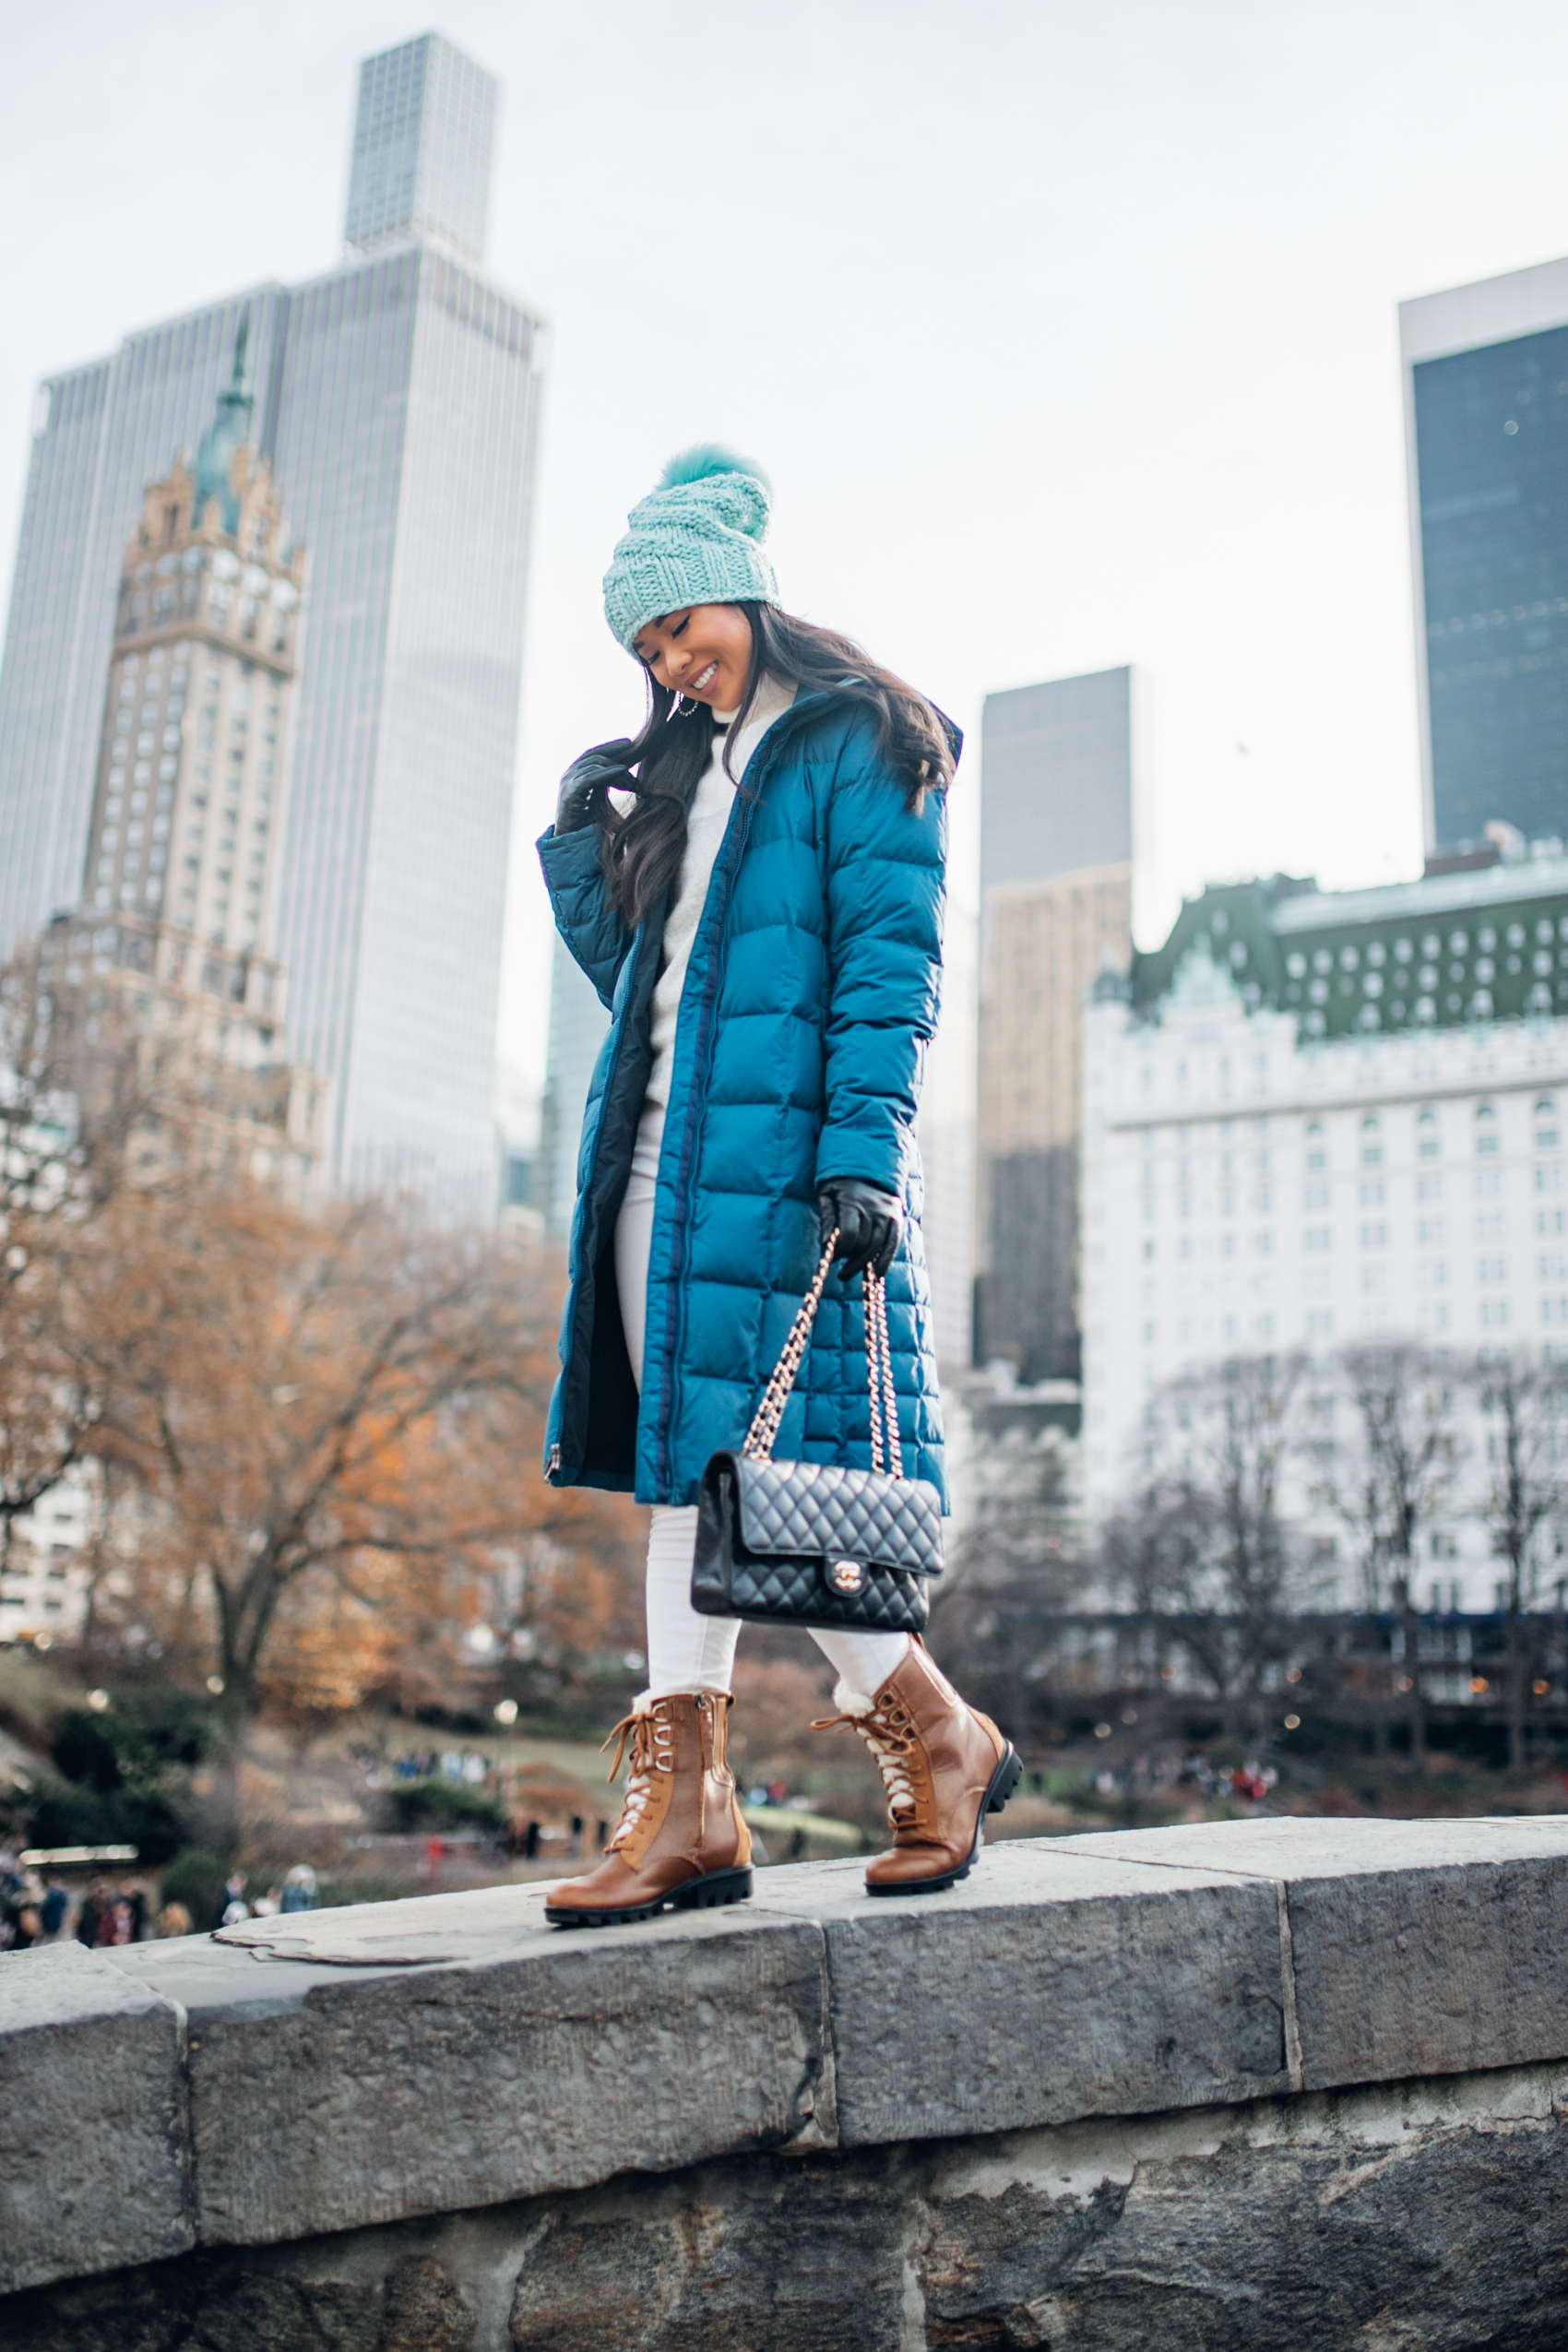 Colorful winter outfit that's actually warm for cold weather